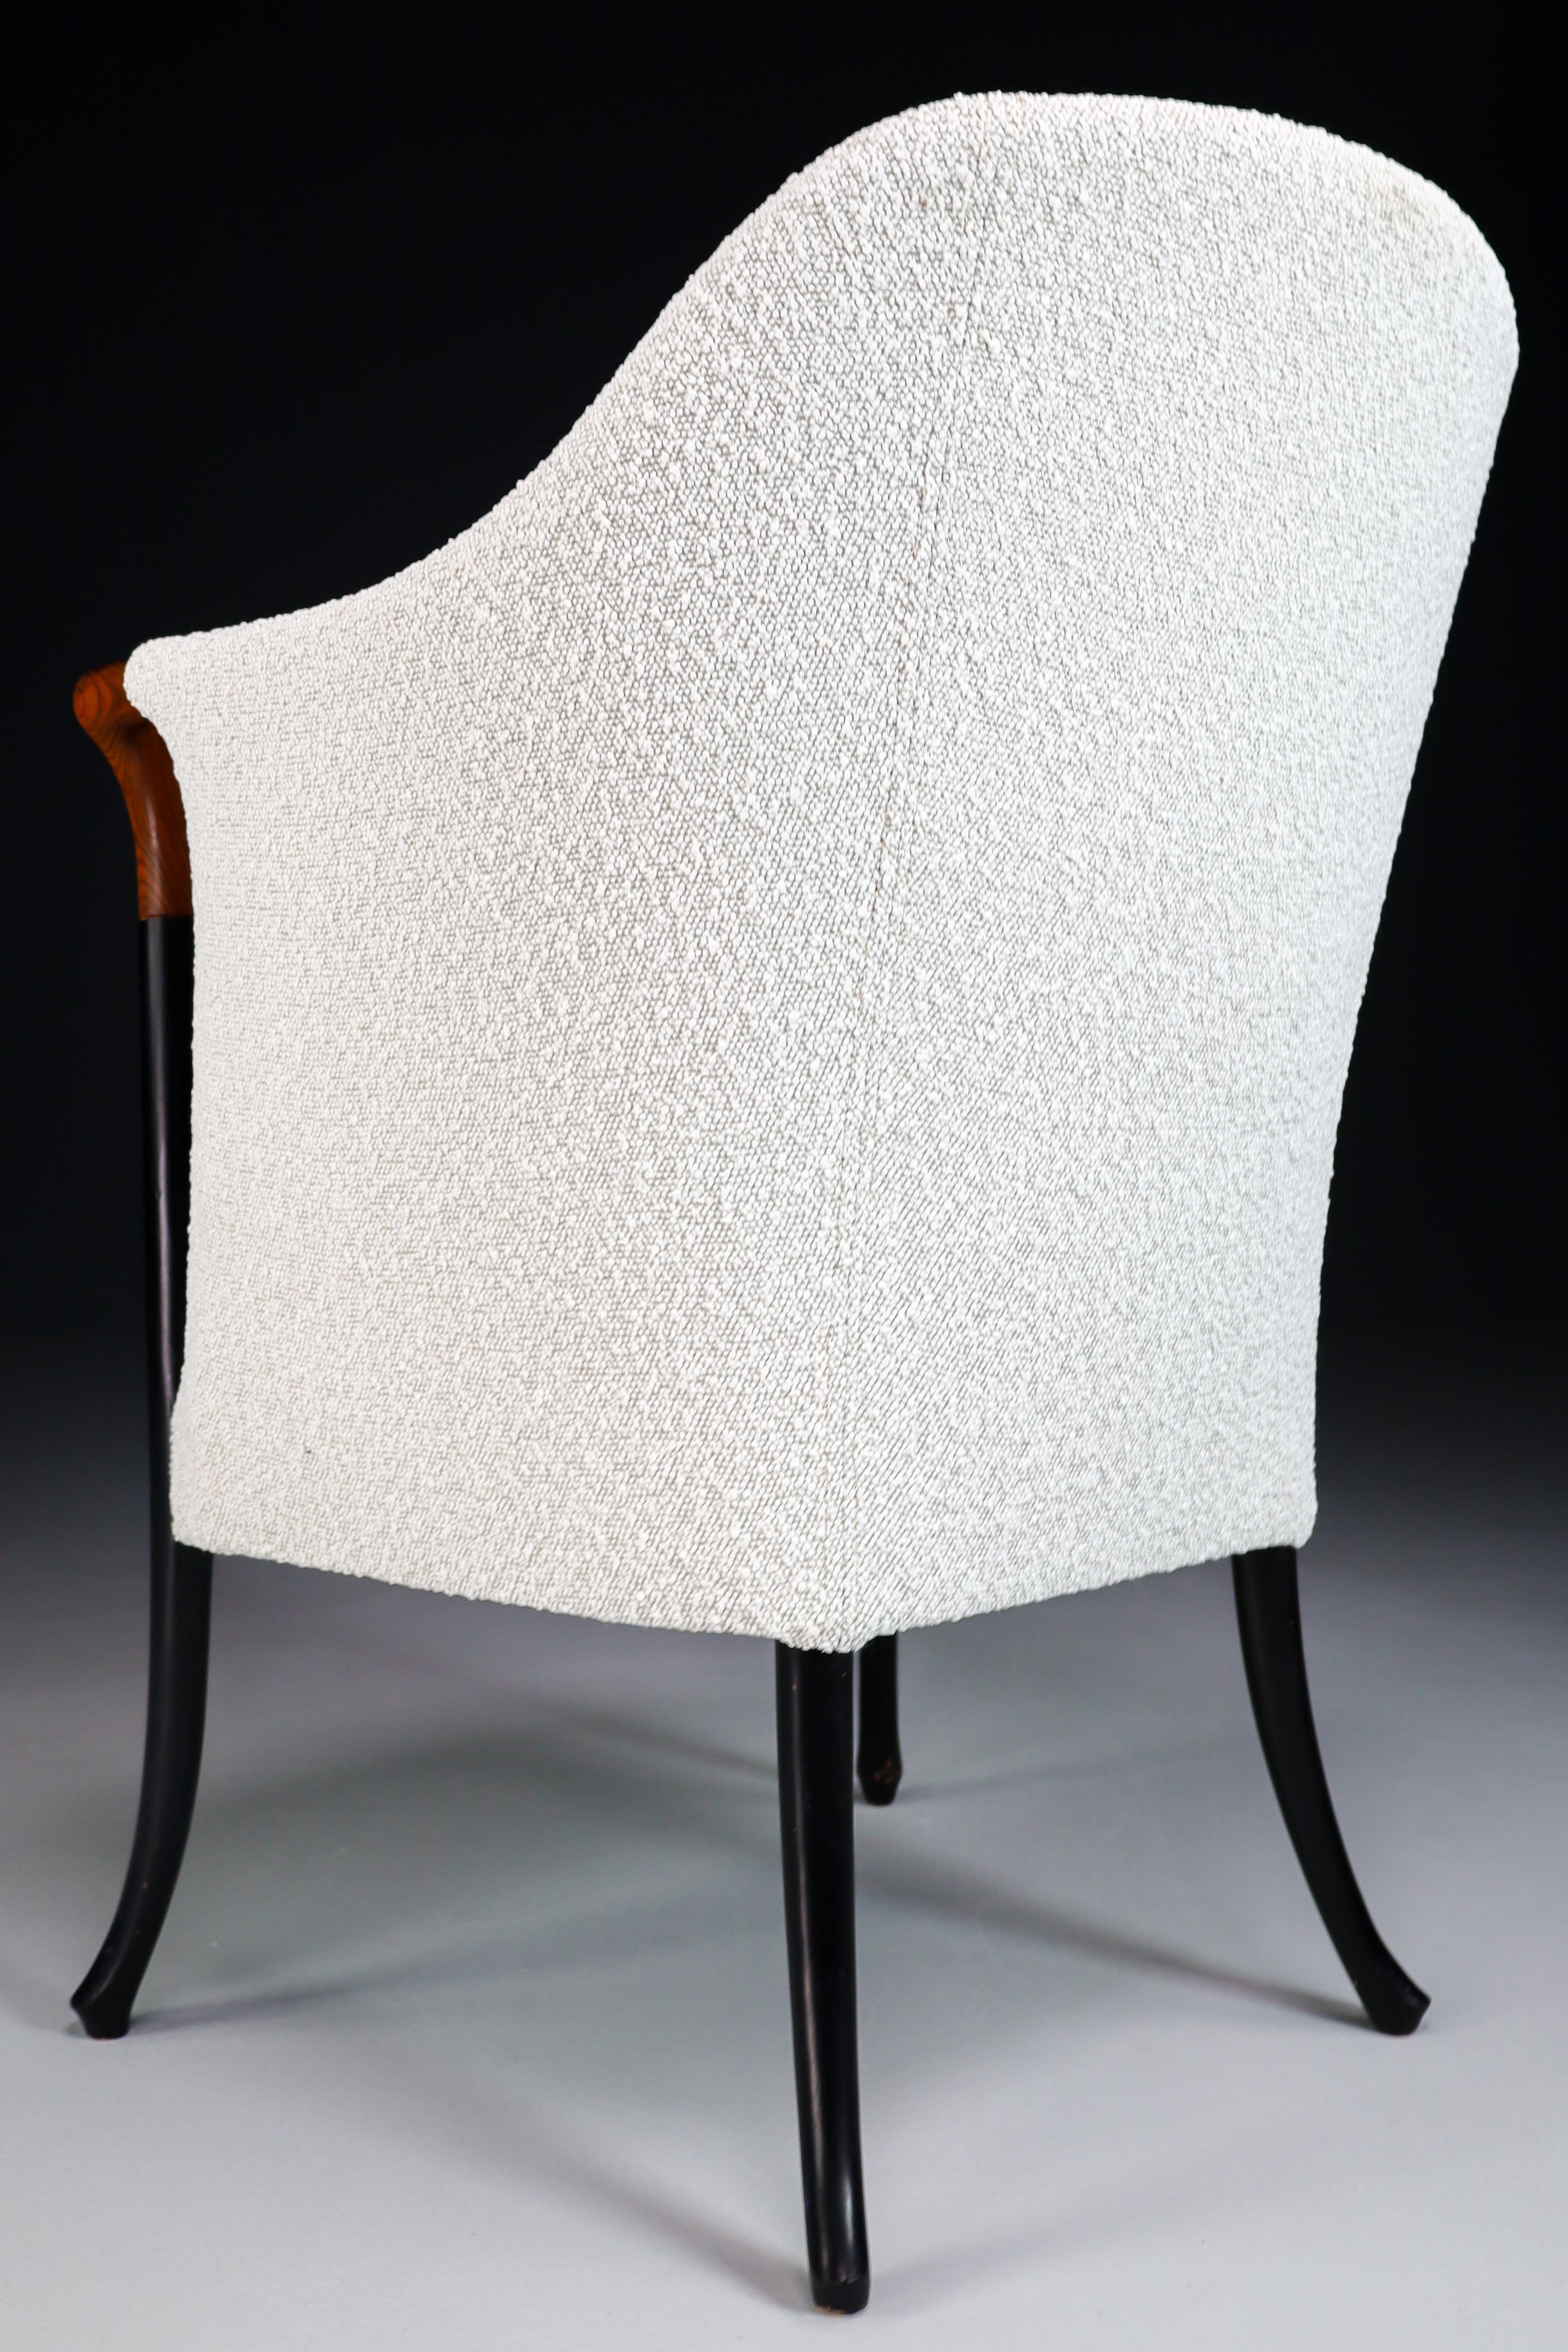 Italian Progetti Armchair by Umberto Asnago for Giorgetti in Bouclé Wool Fabric, Italy